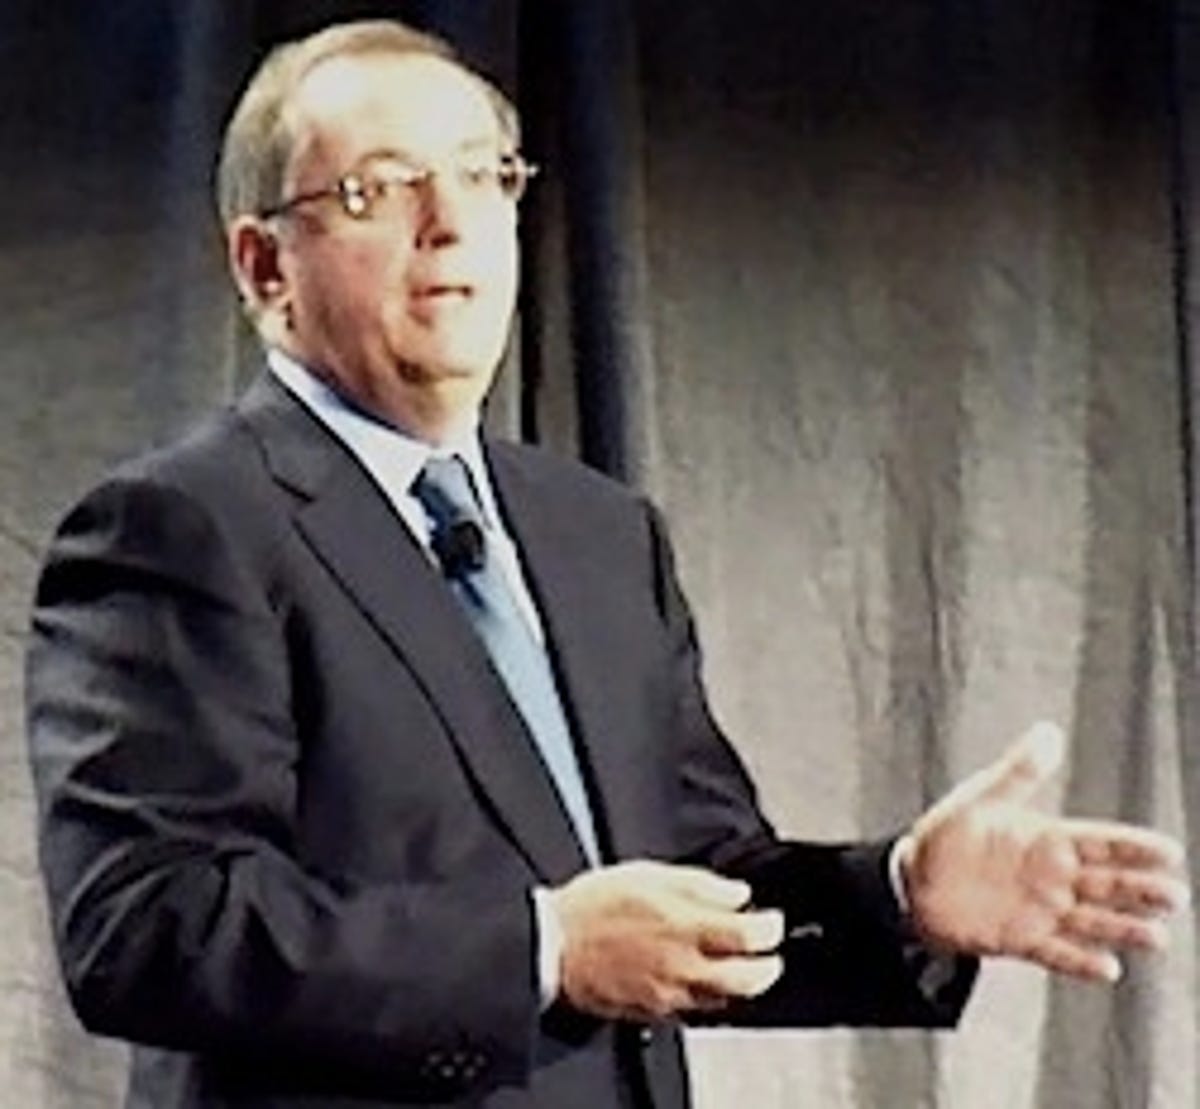 Intel CEO Paul Otellini speaking at the company's investor meeting on Tuesday.